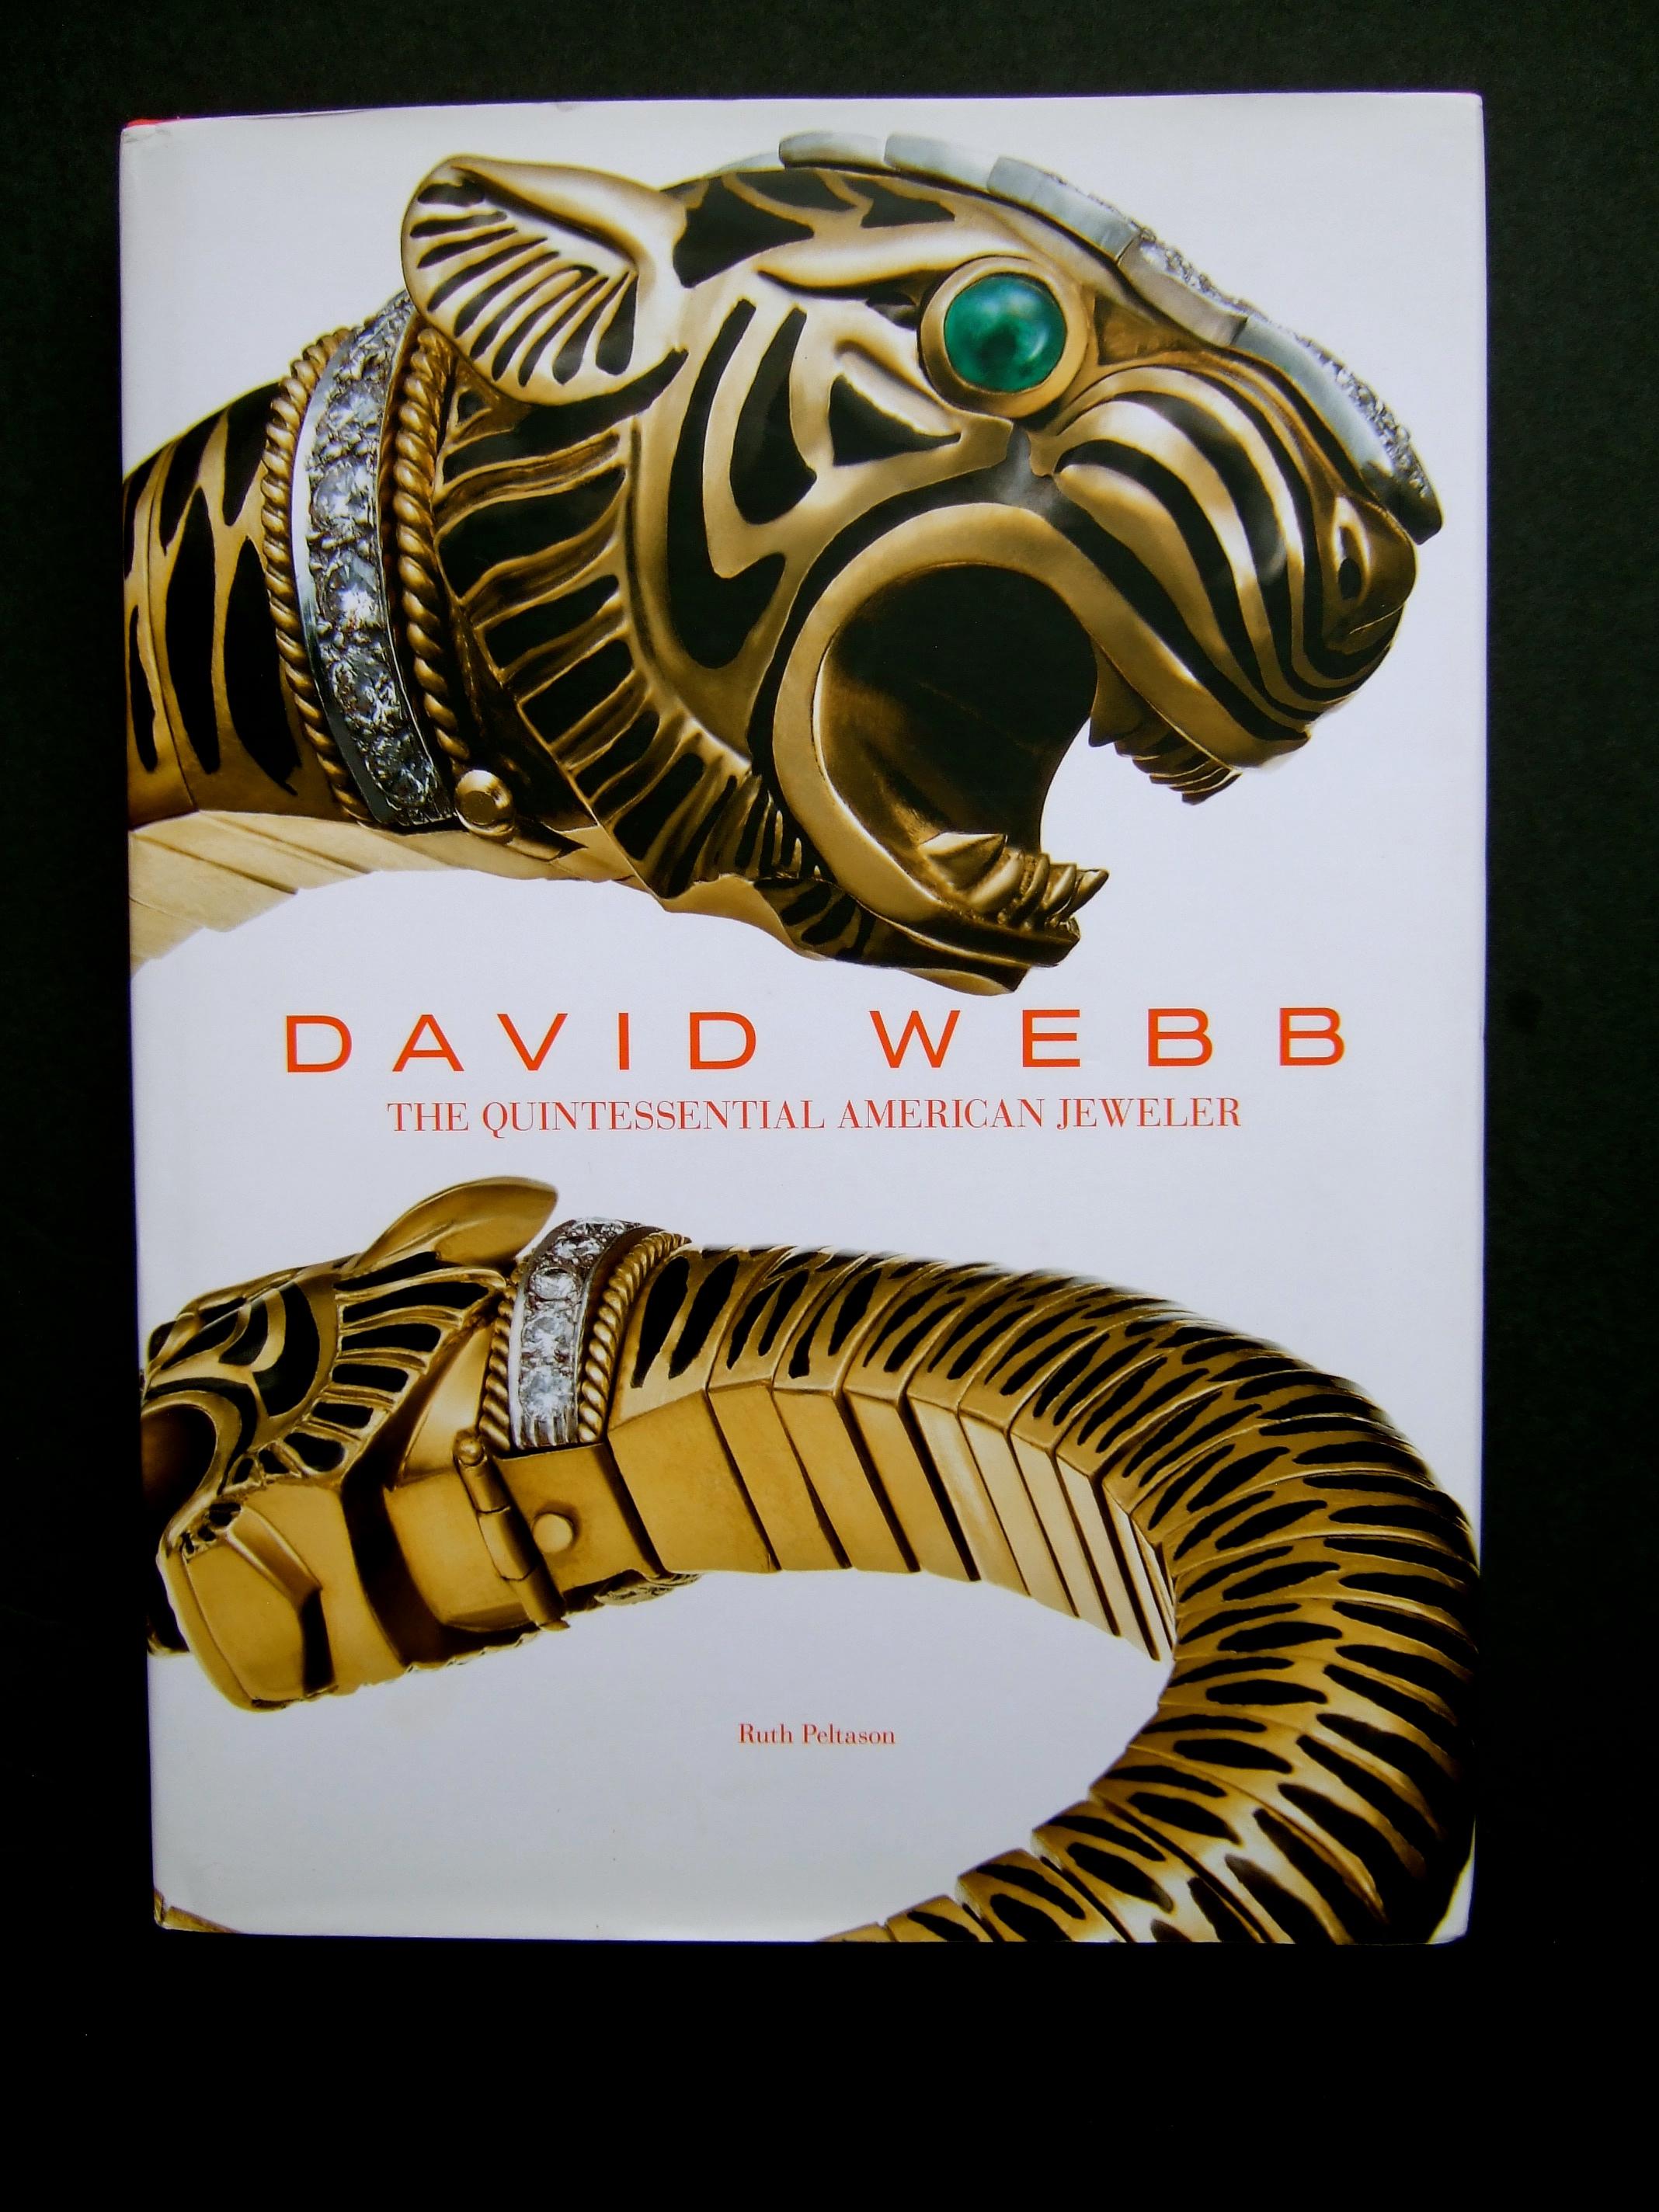 David Webb The Quintessential American Jeweler hard cover book by Ruth Peltrason c 2013
The book is an amazing archive of Webb's extraordinary 20th century jewelry designs
Webb is best known for his enchanting animal themed jeweled enamel bracelets